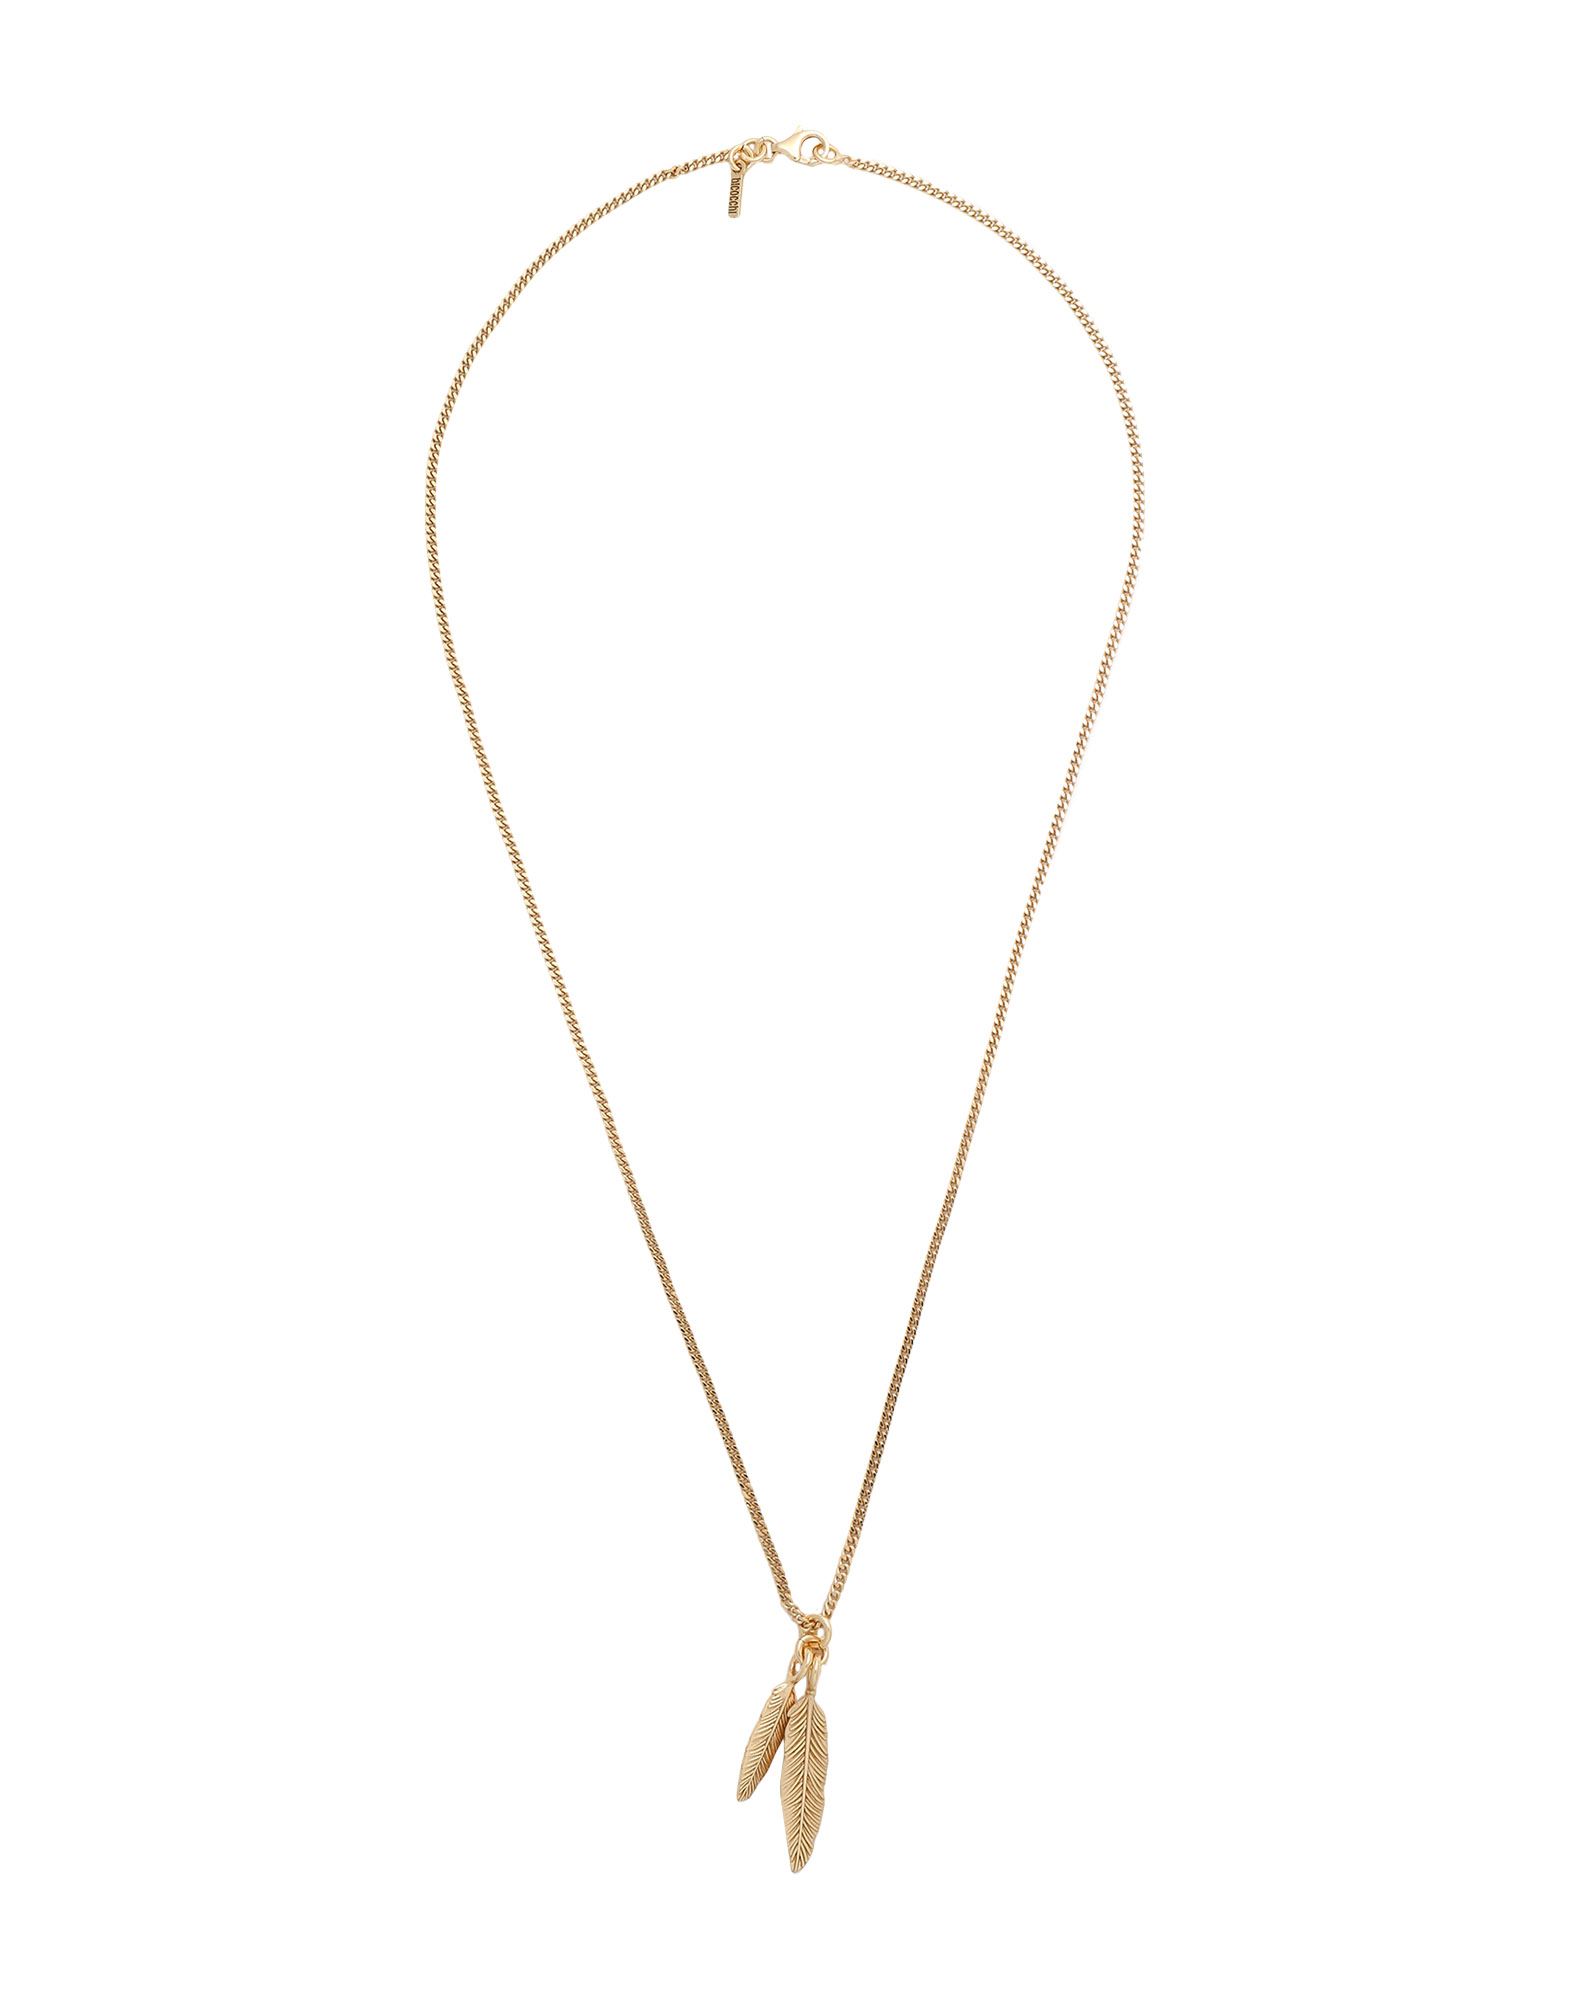 Shop Emanuele Bicocchi Twin Feather Pendant Necklace Gold Size - 925/1000 Silver, 24kt Gold-plated